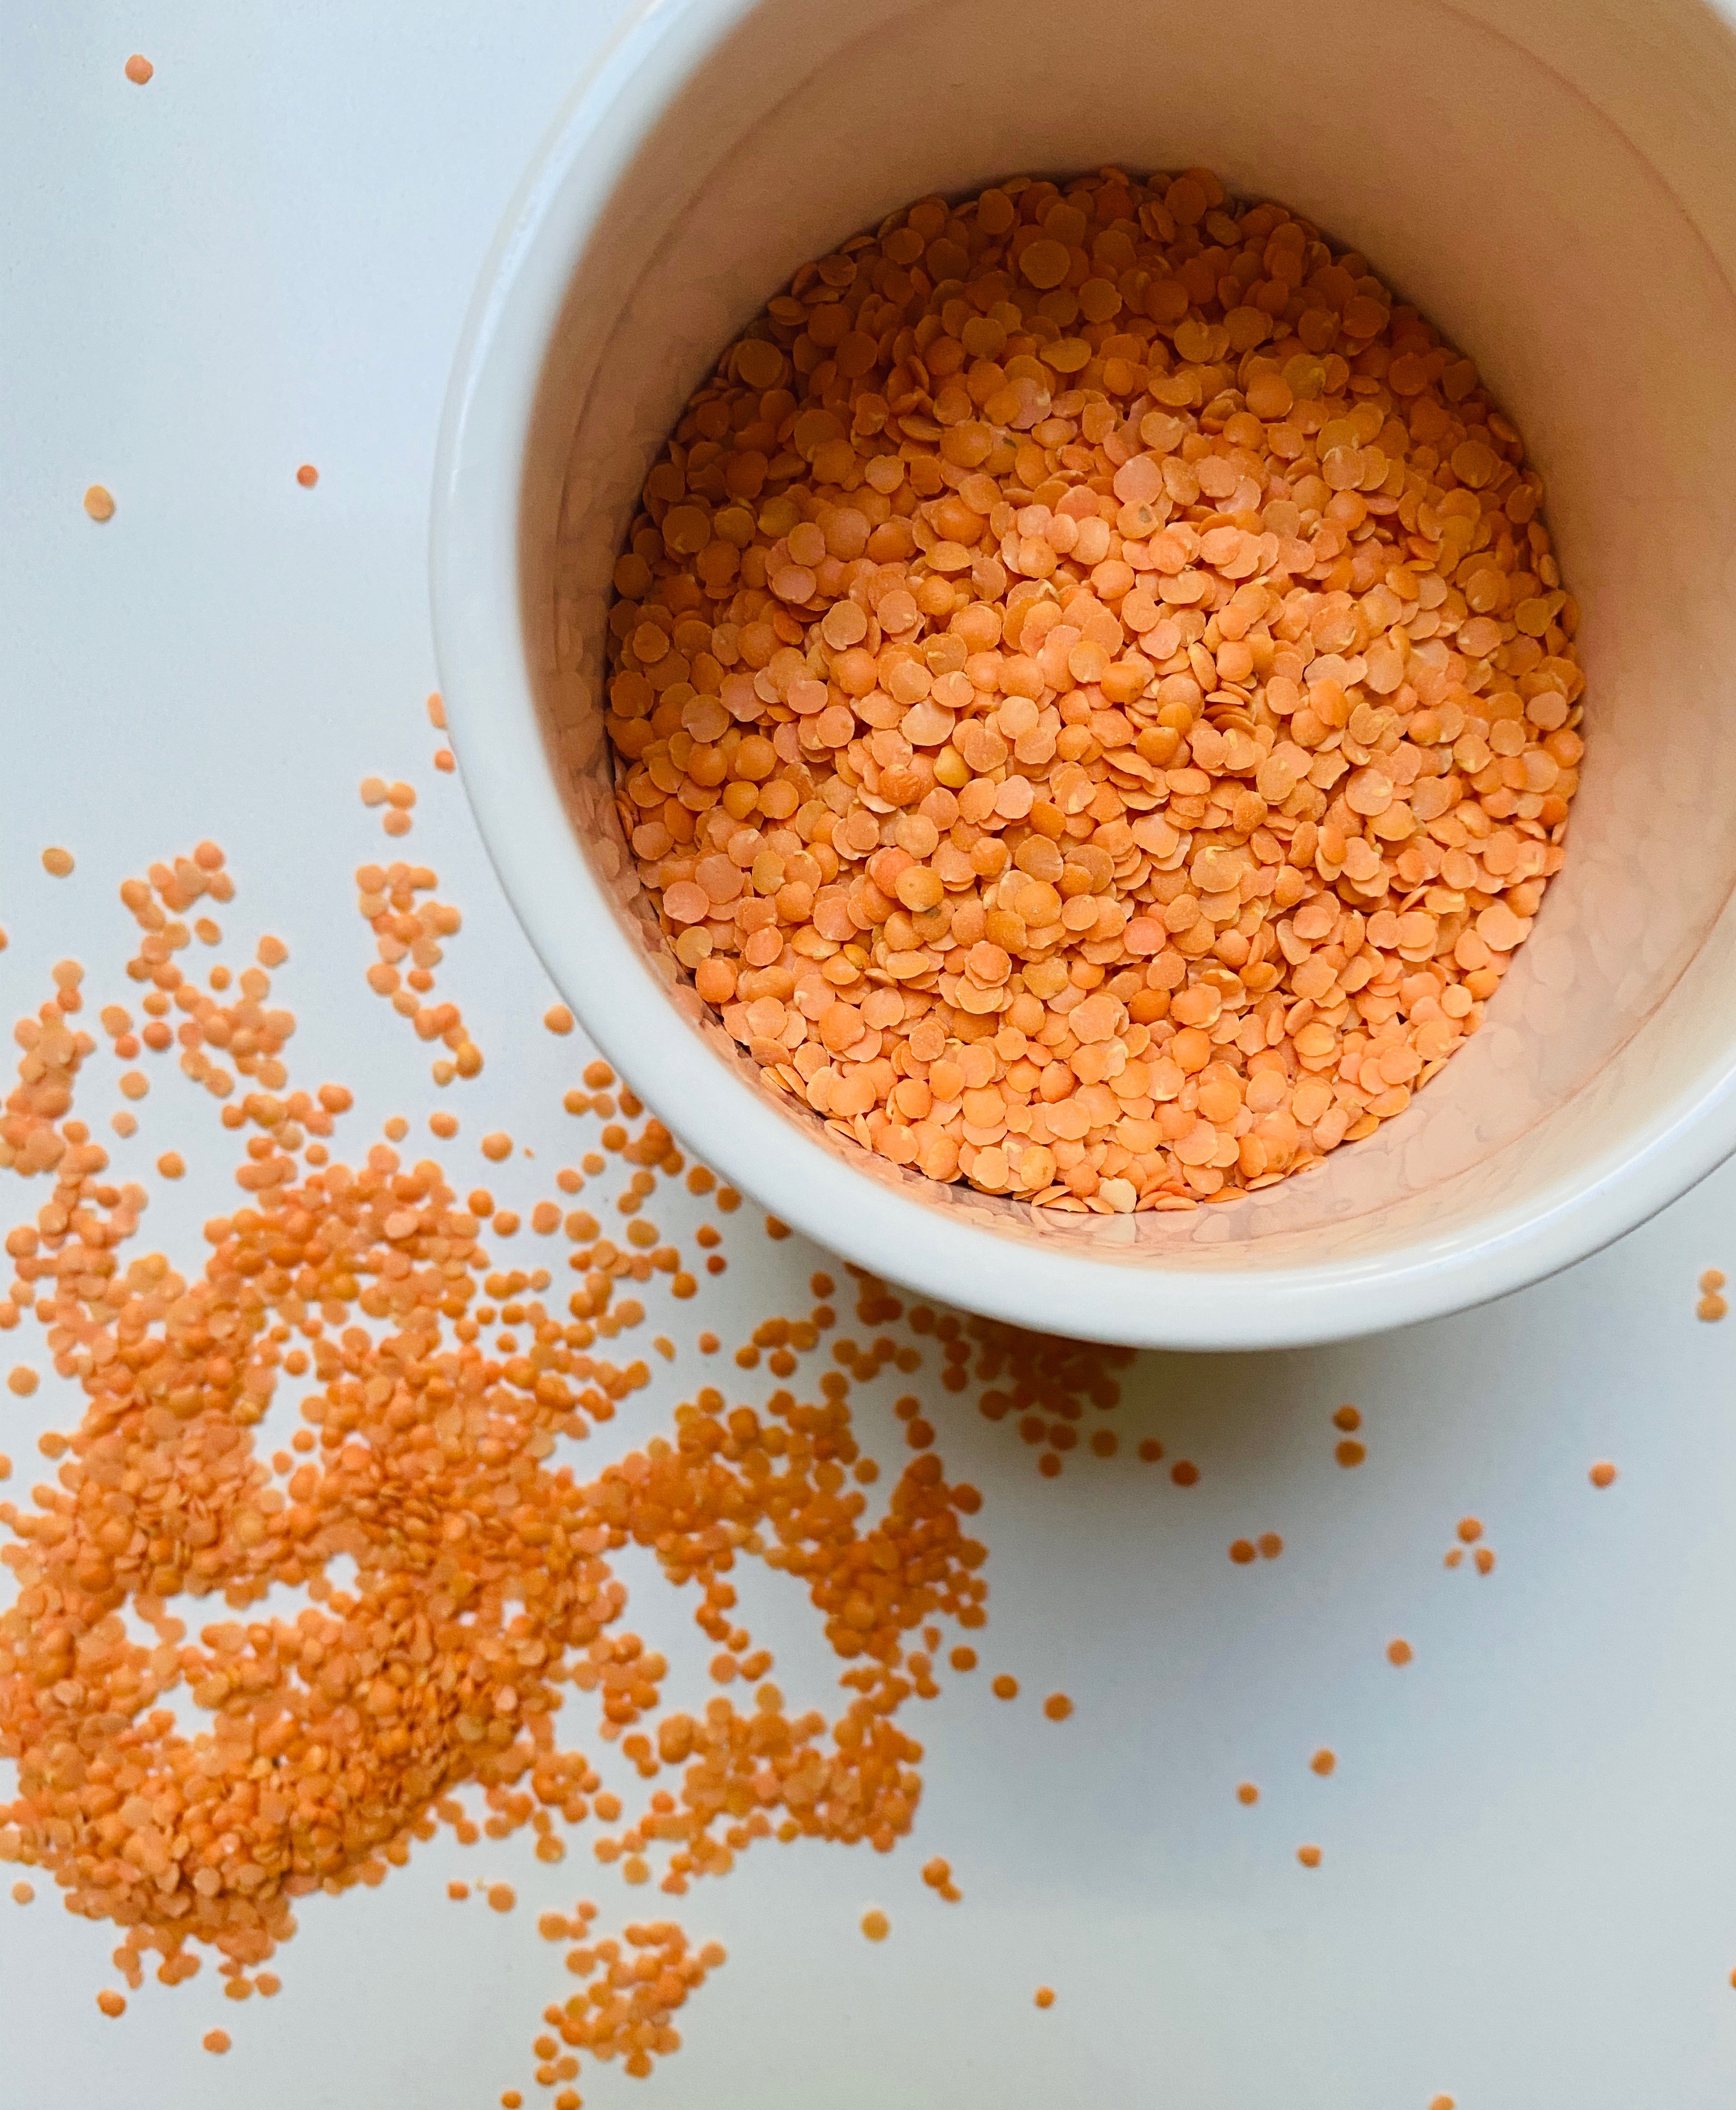 Red lentils - Aug. 2020